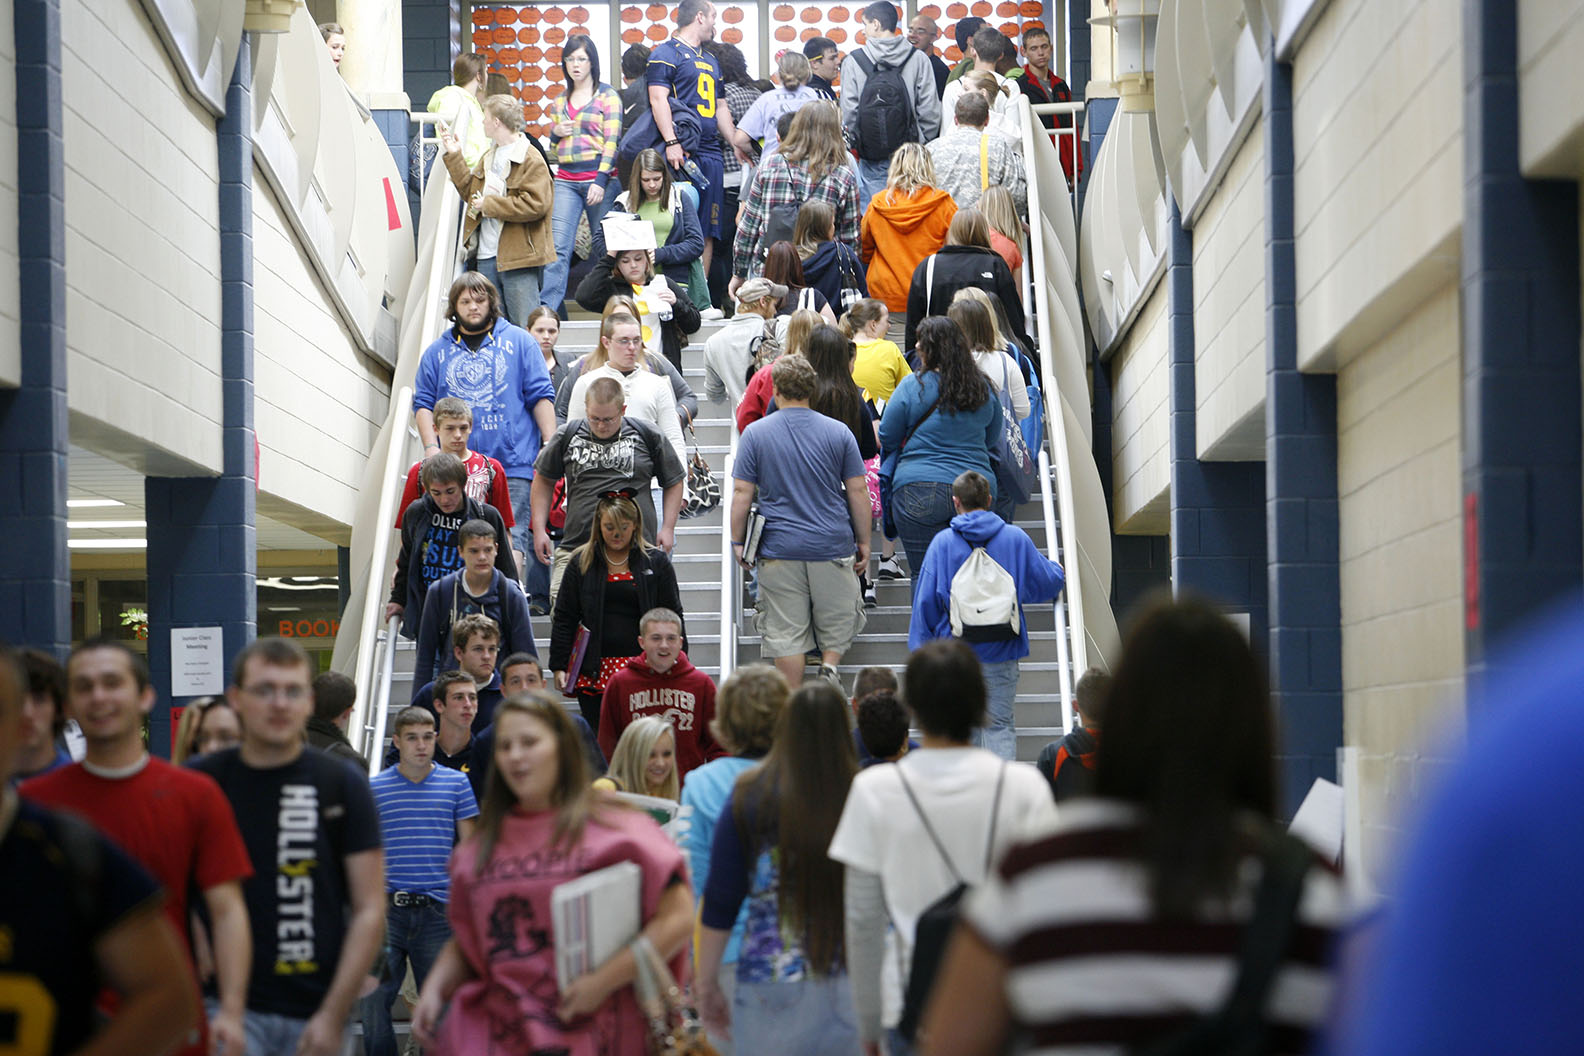 A group of students walk up and down a staircase at Knox County High School.